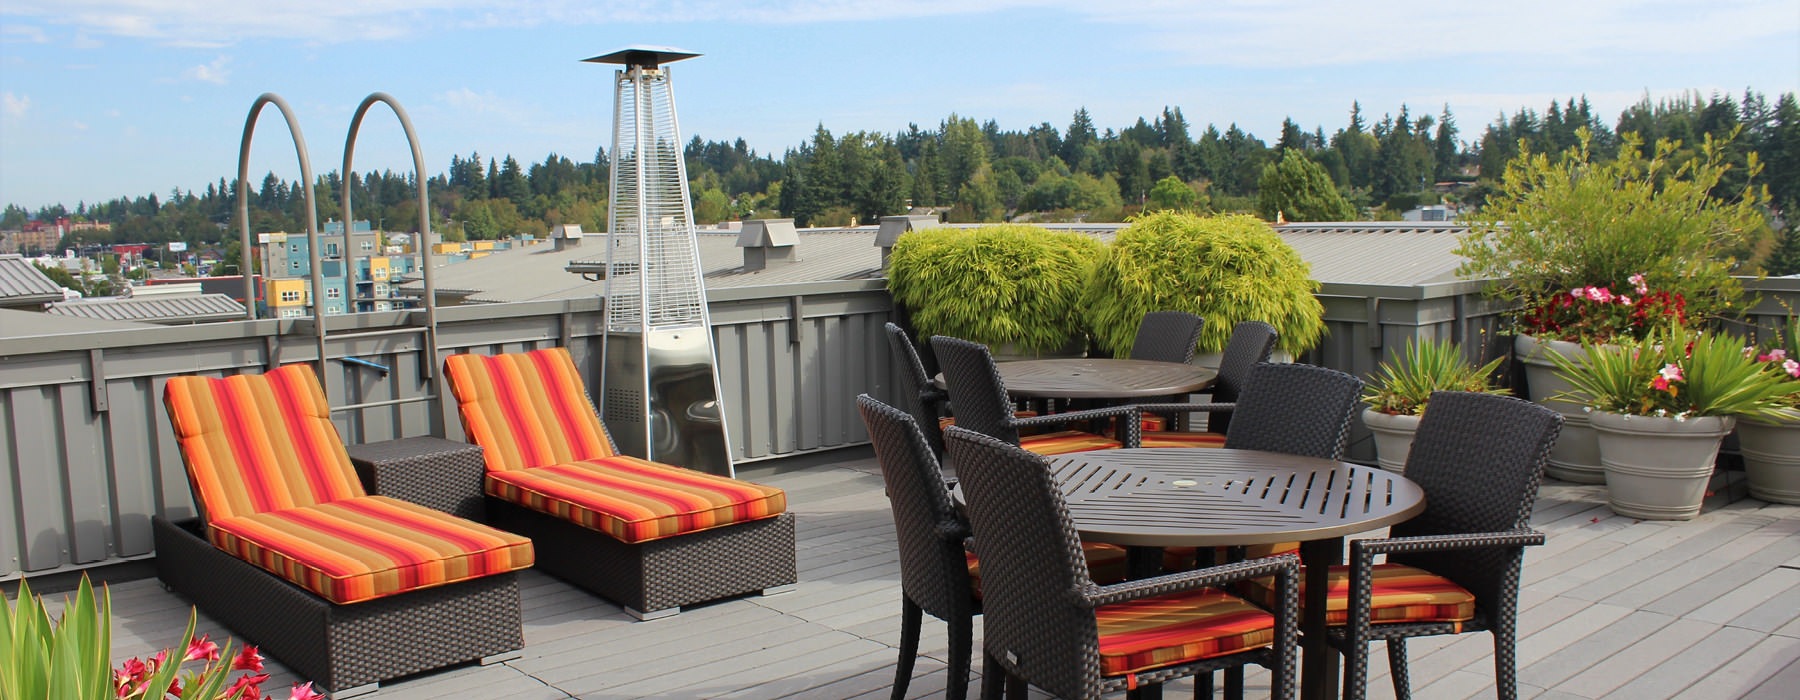 rooftop deck with lounge chairs, tables, and heaters